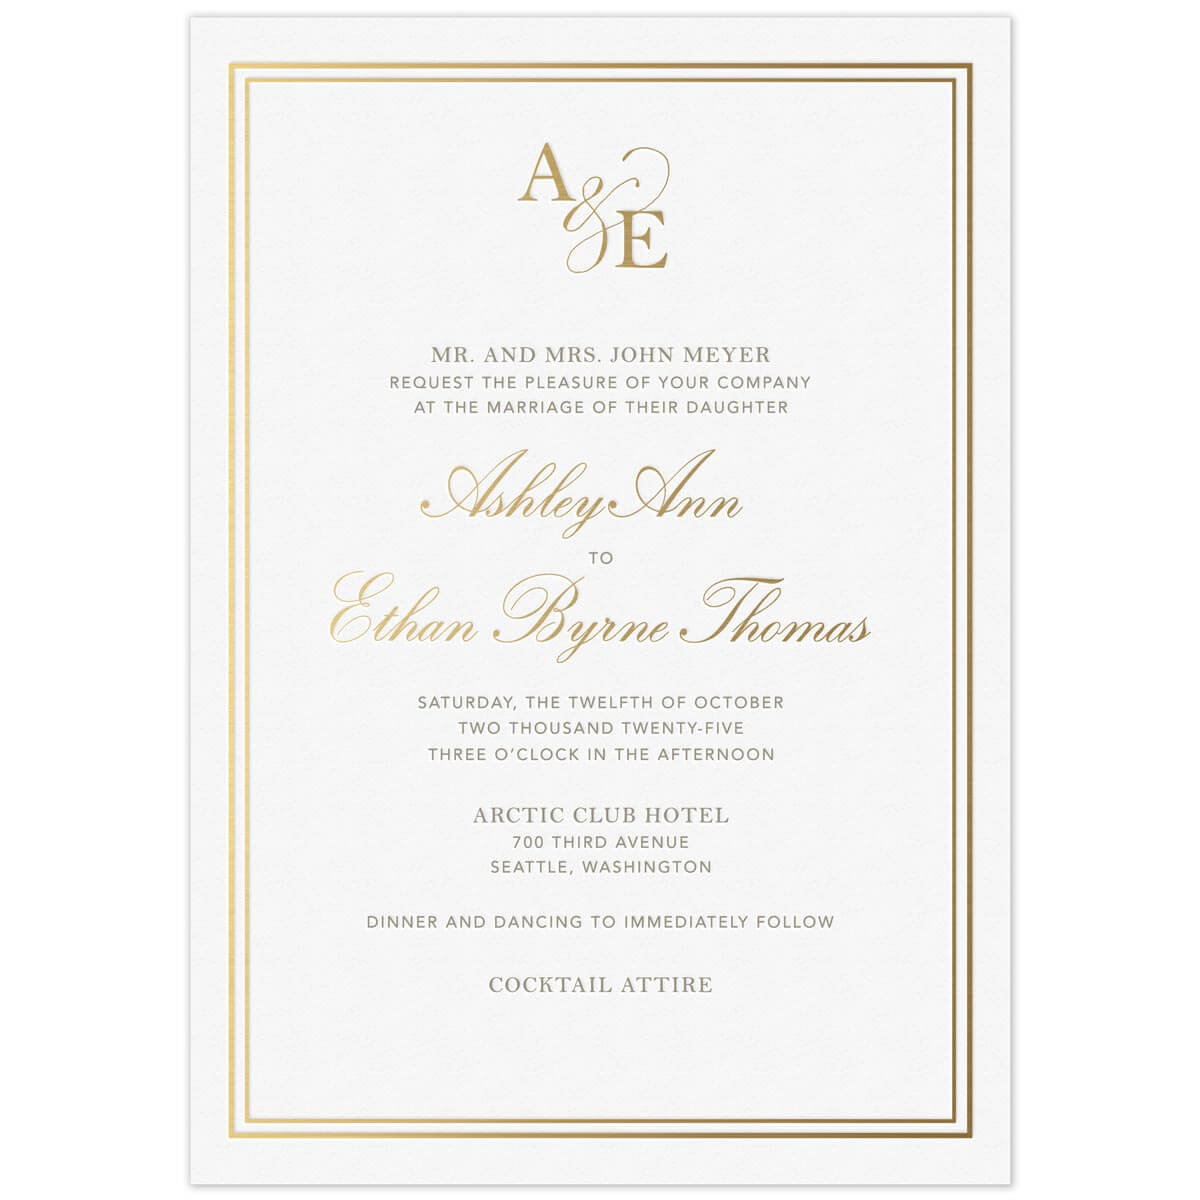 a white paper invitation with gold borders and gold initials at the top and gold script and black block fonts